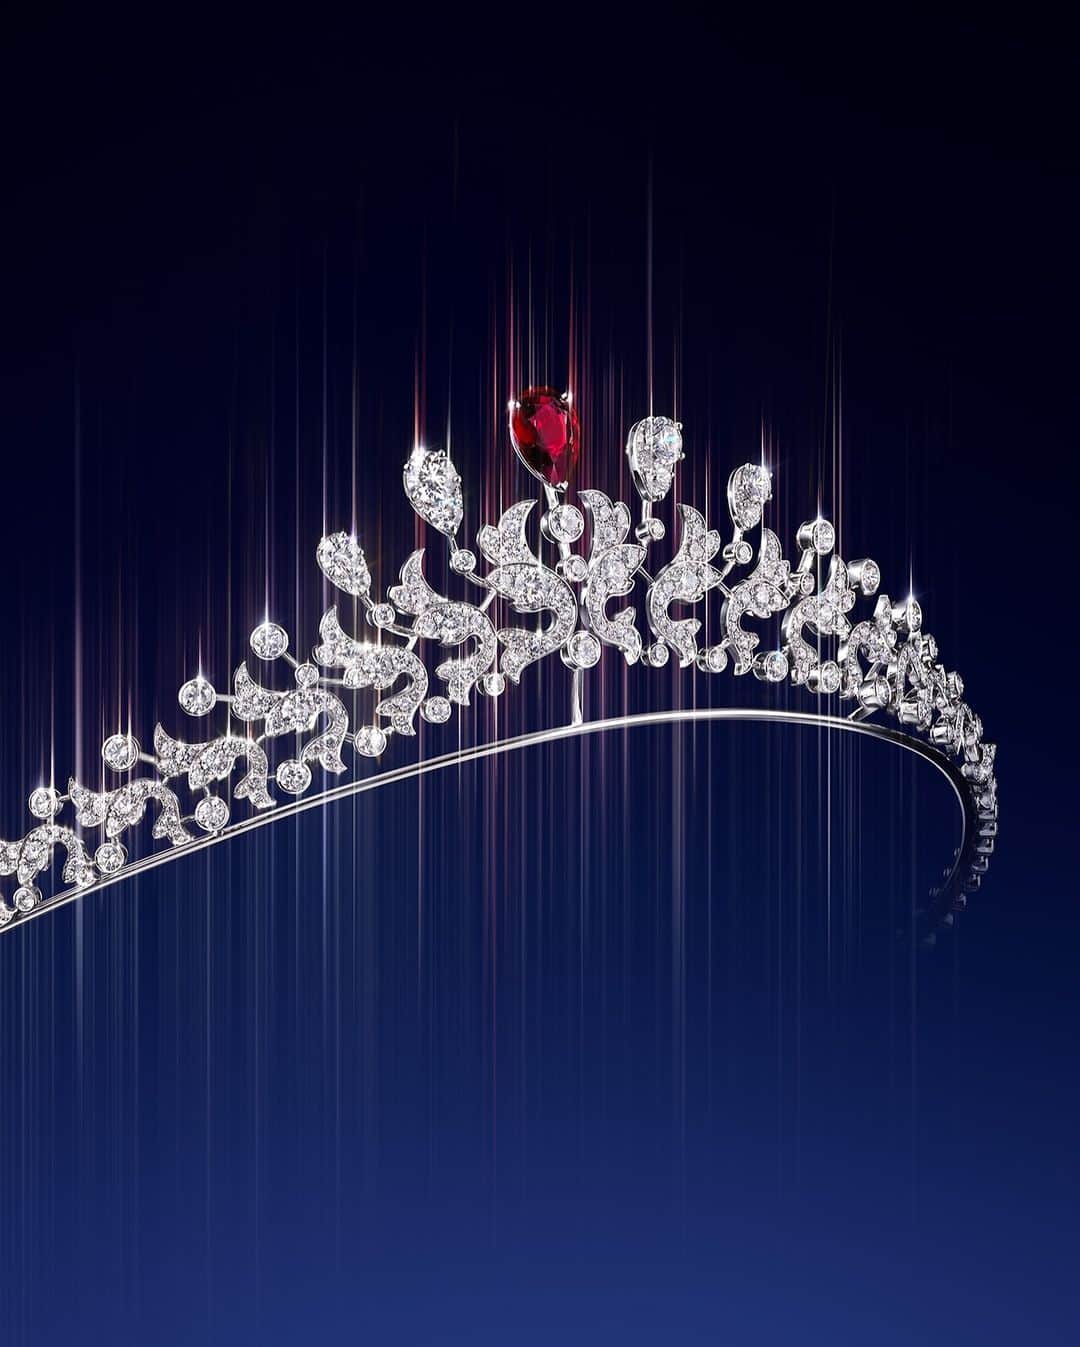 Chaumetのインスタグラム：「As the New Year unfolds, may the Soir de Fête tiara with its precious ruby illuminate your path into new beginnings. Here’s to a year filled with brilliance, joy, and unforgettable moments.   Maison Chaumet wishes you a Happy New Year!  #ChaumetCelebrates #ChaumetHighJewellery」